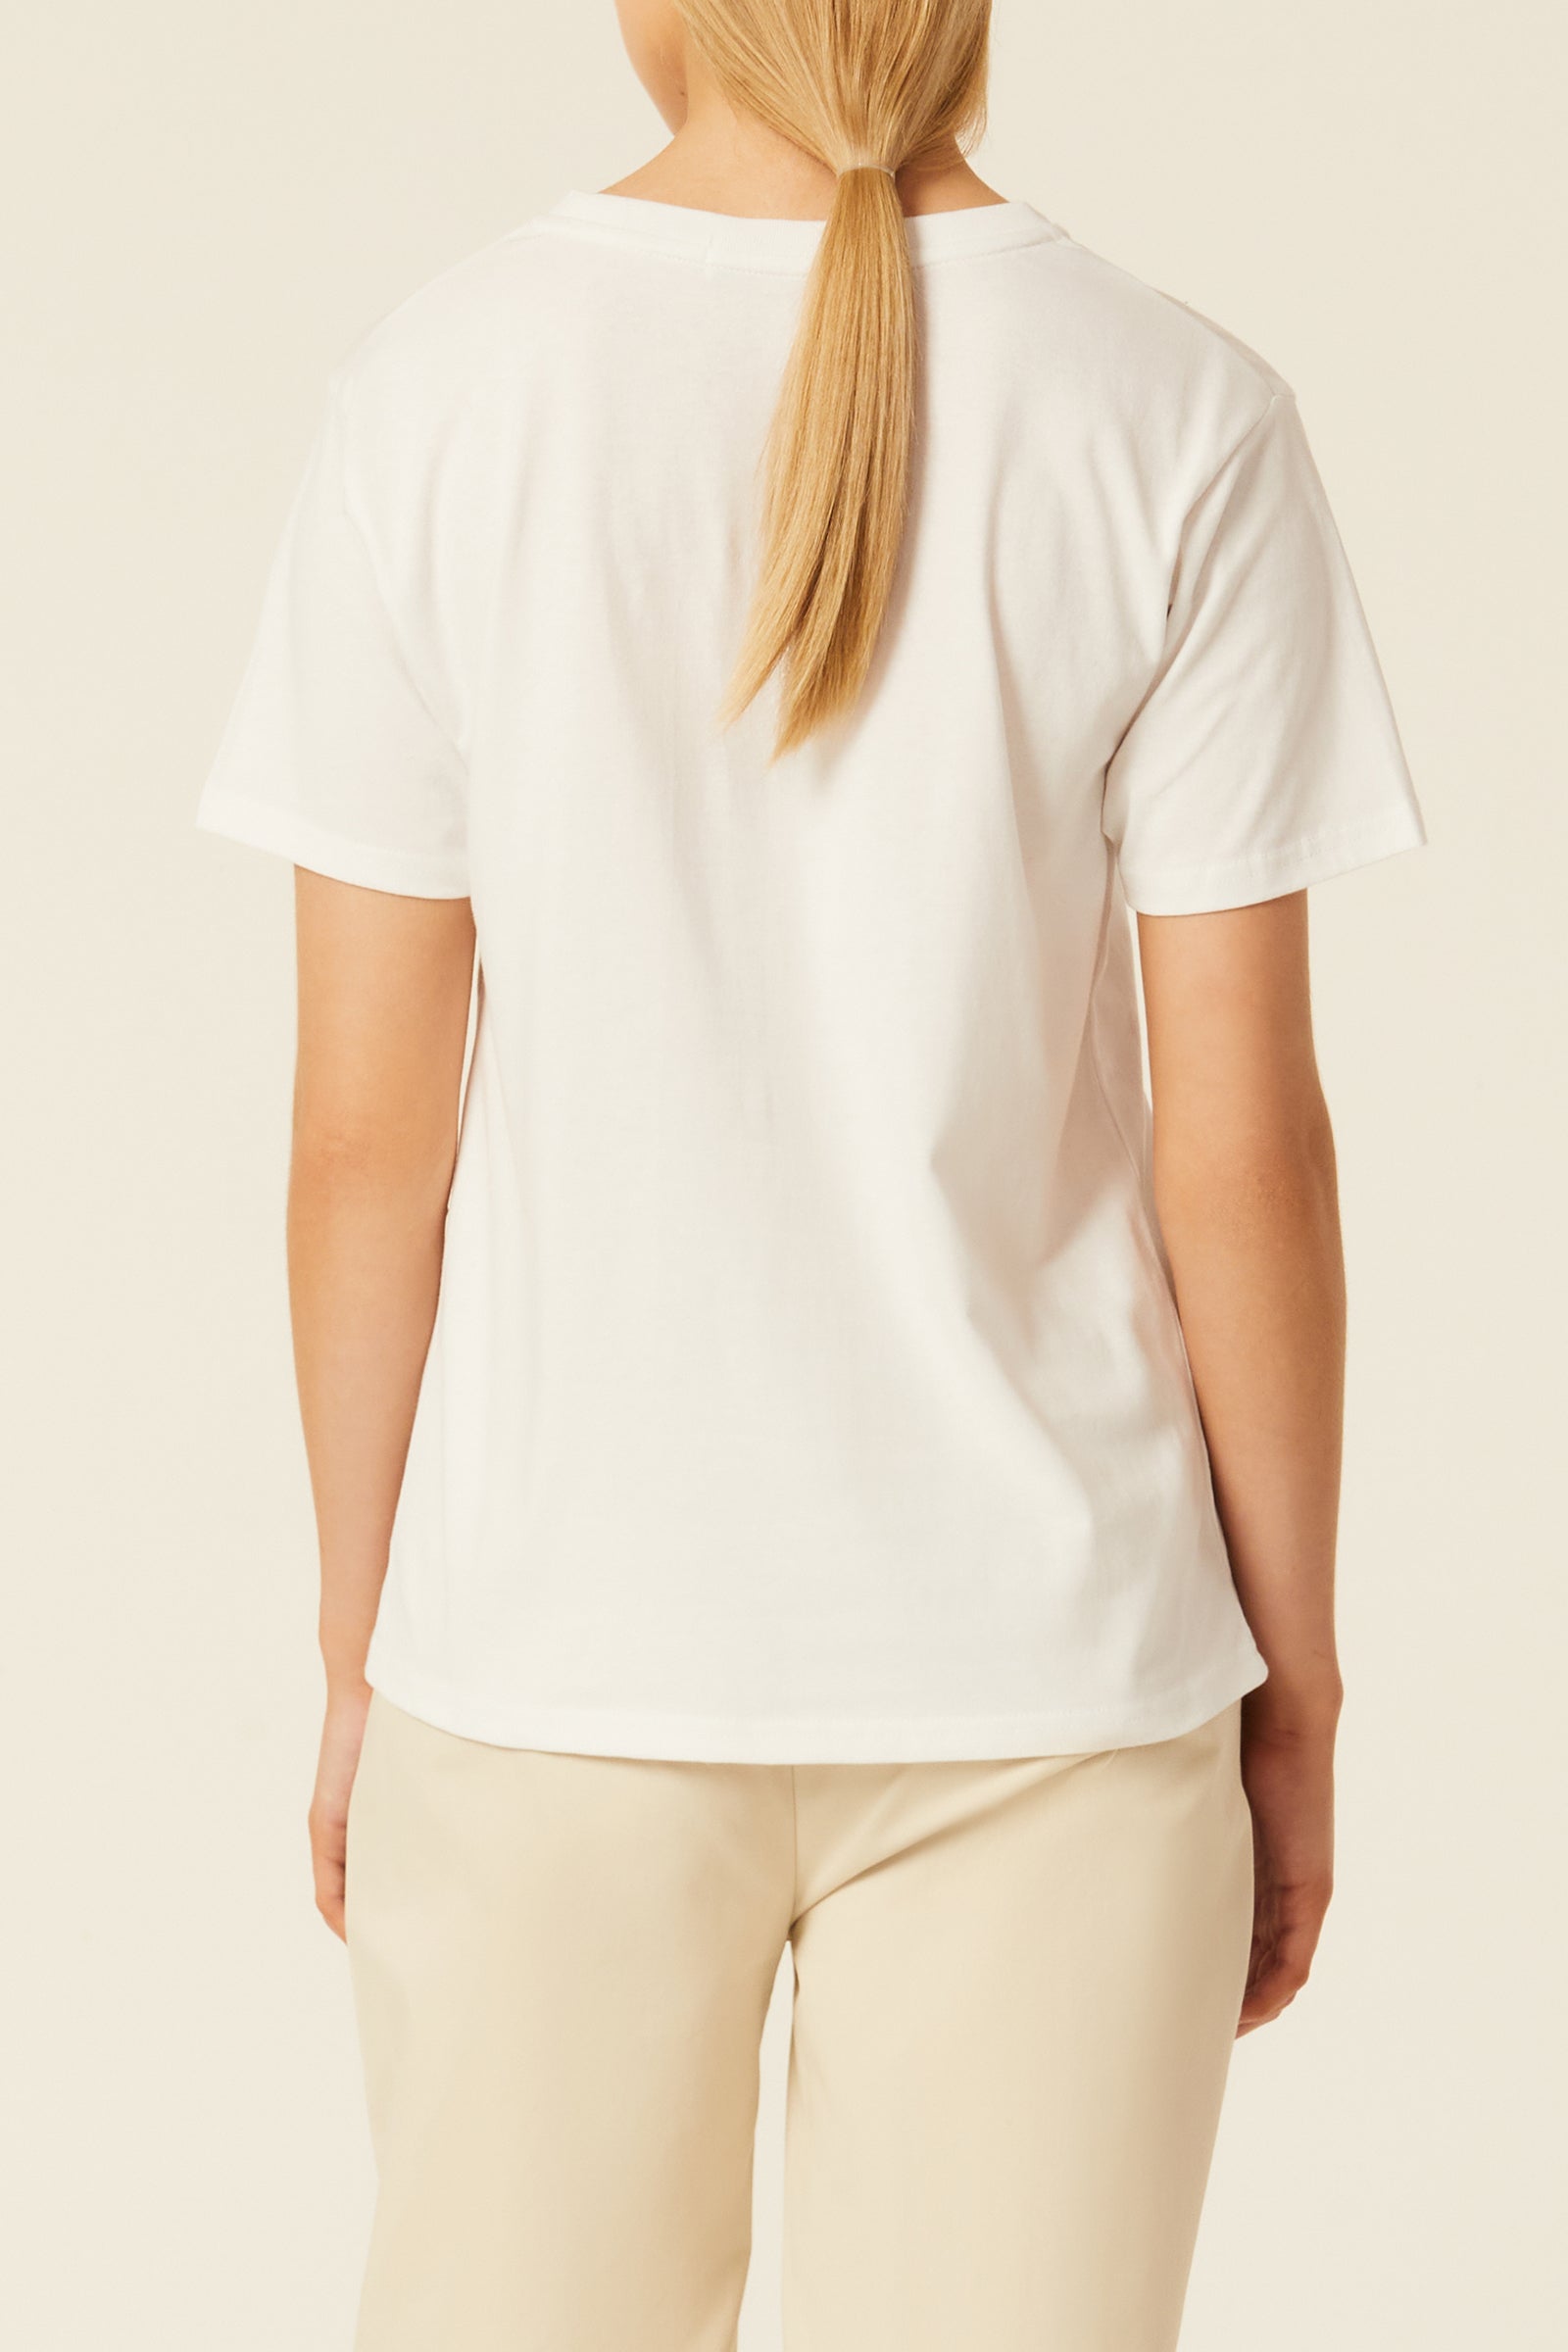 Nude Lucy Nude Classics Tee In White 